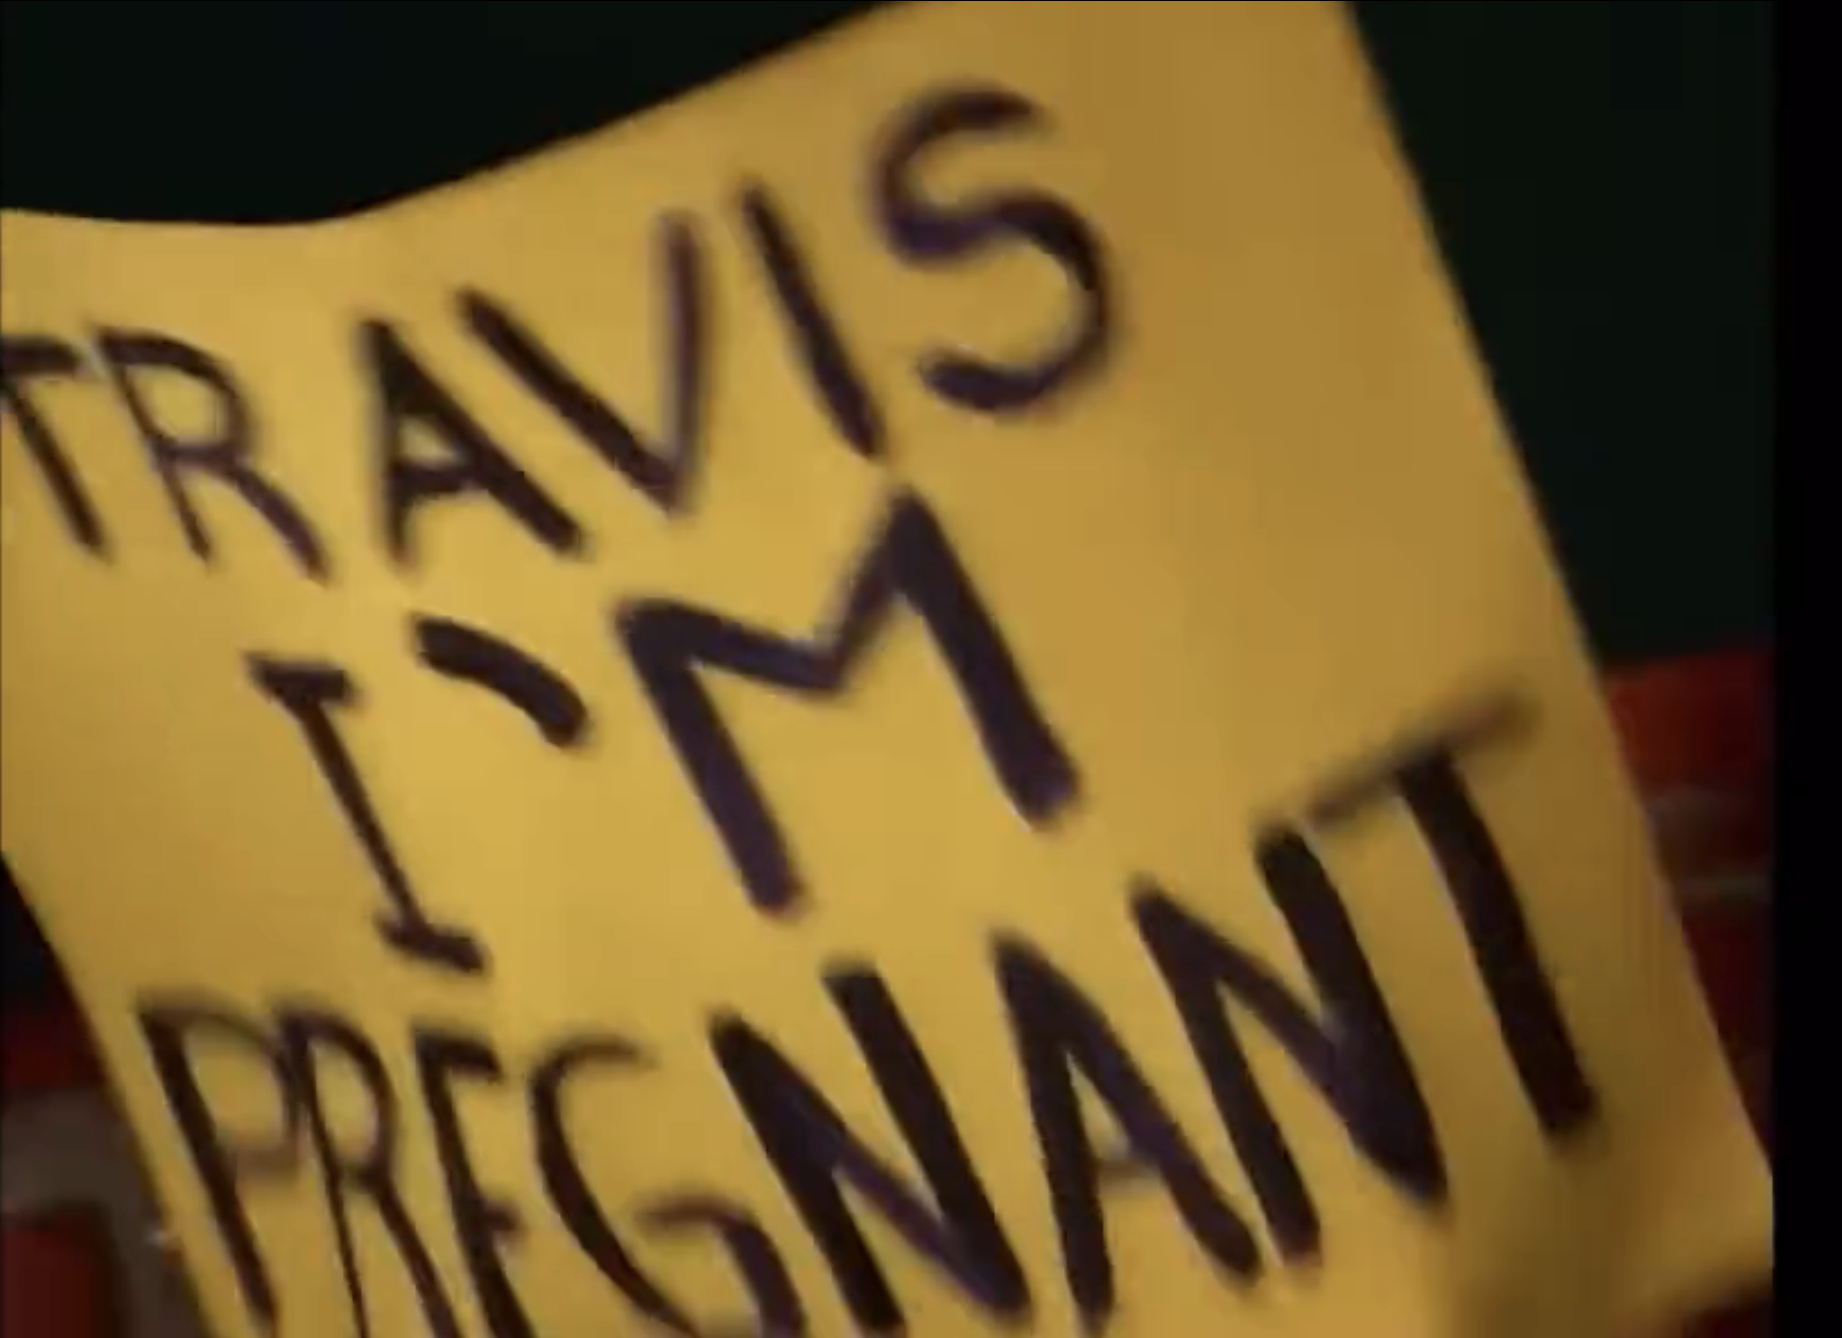 sign in the music video